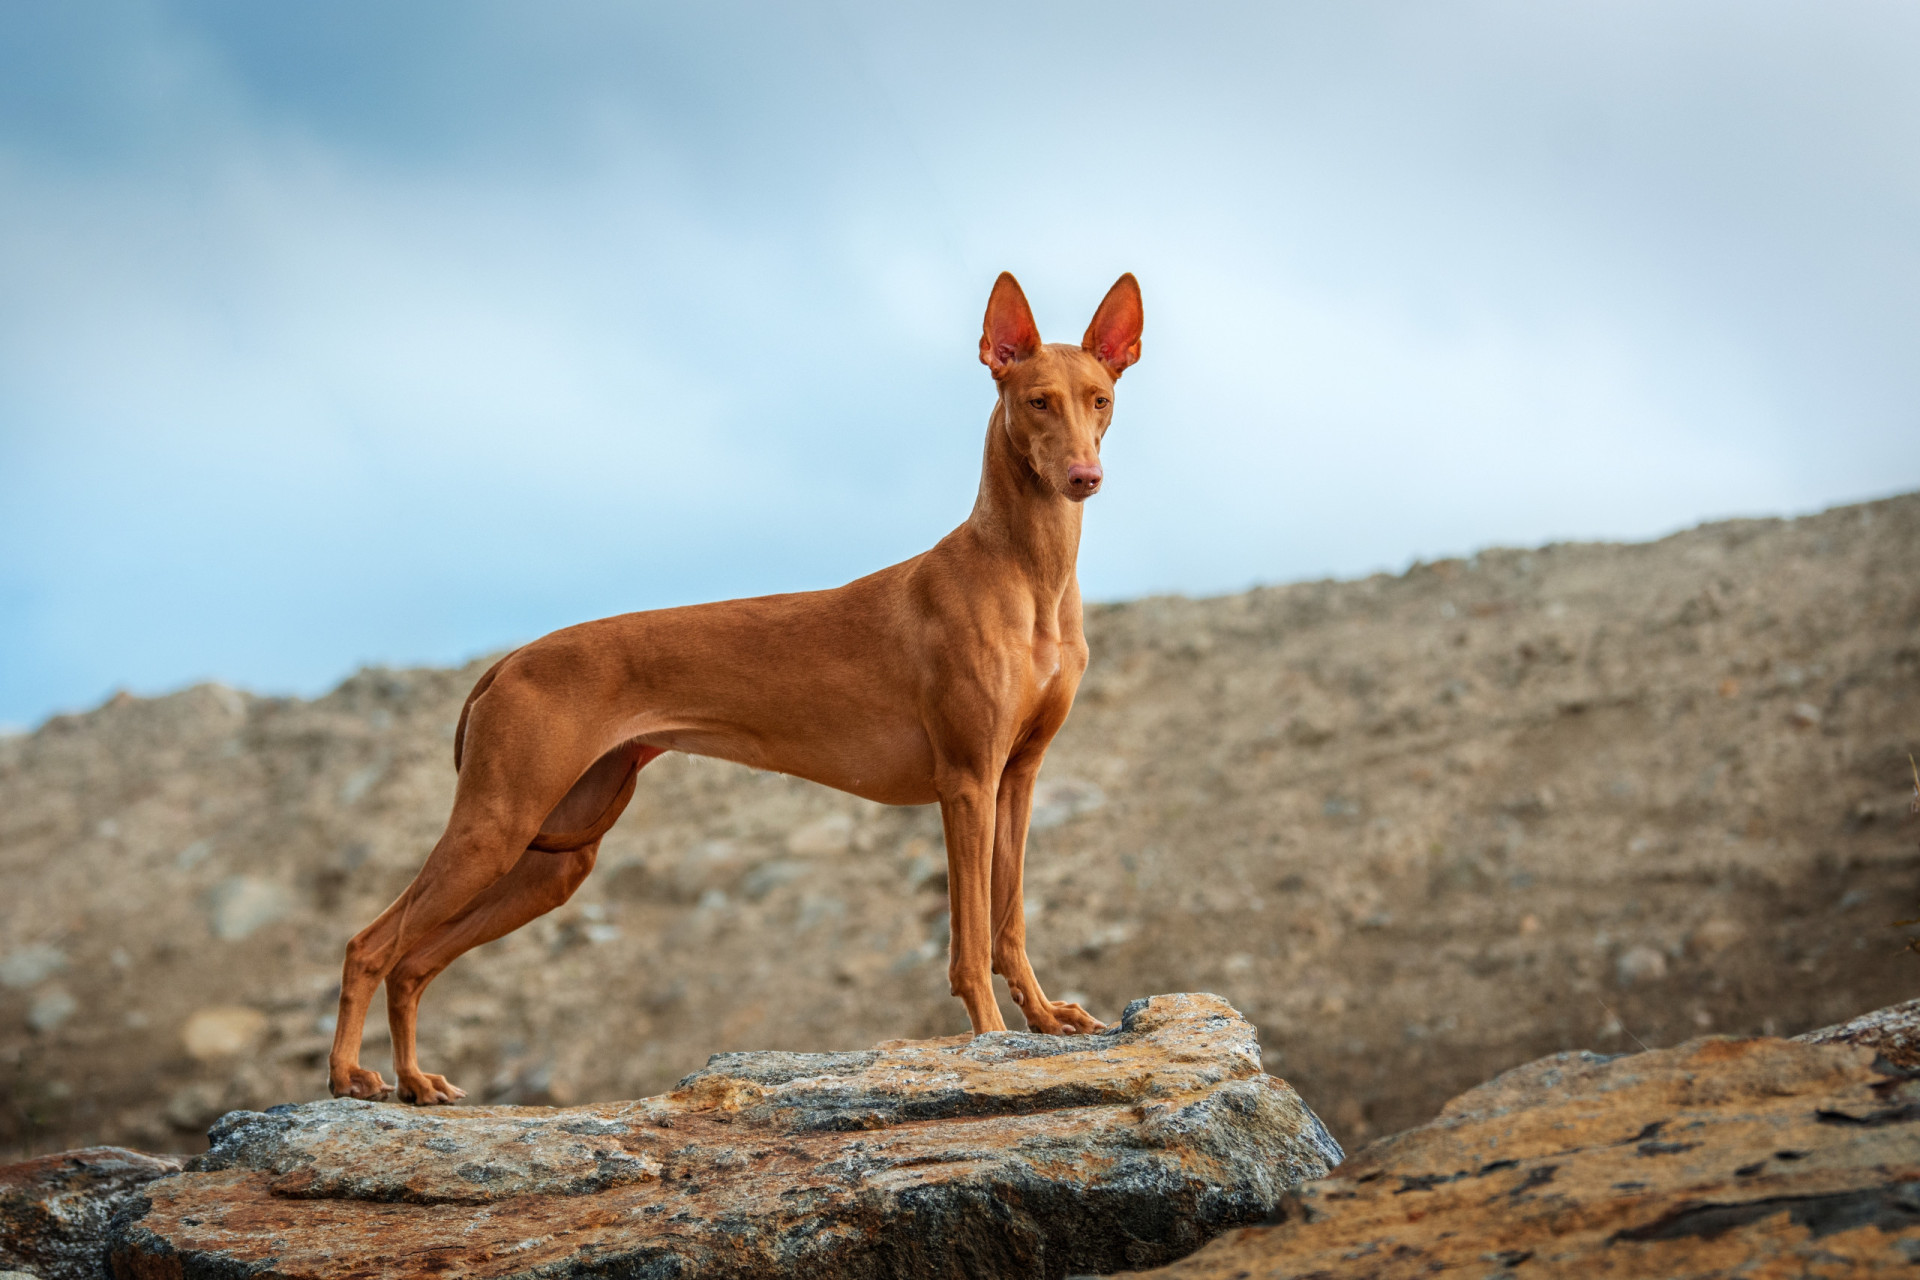 <p>Known to be one of the healthiest dog breeds around, these desert dogs prefer hotter climates. Independent and strong-willed, they live to around 13 years. </p><p><a href="https://www.msn.com/en-us/community/channel/vid-7xx8mnucu55yw63we9va2gwr7uihbxwc68fxqp25x6tg4ftibpra?cvid=94631541bc0f4f89bfd59158d696ad7e">Follow us and access great exclusive content every day</a></p>